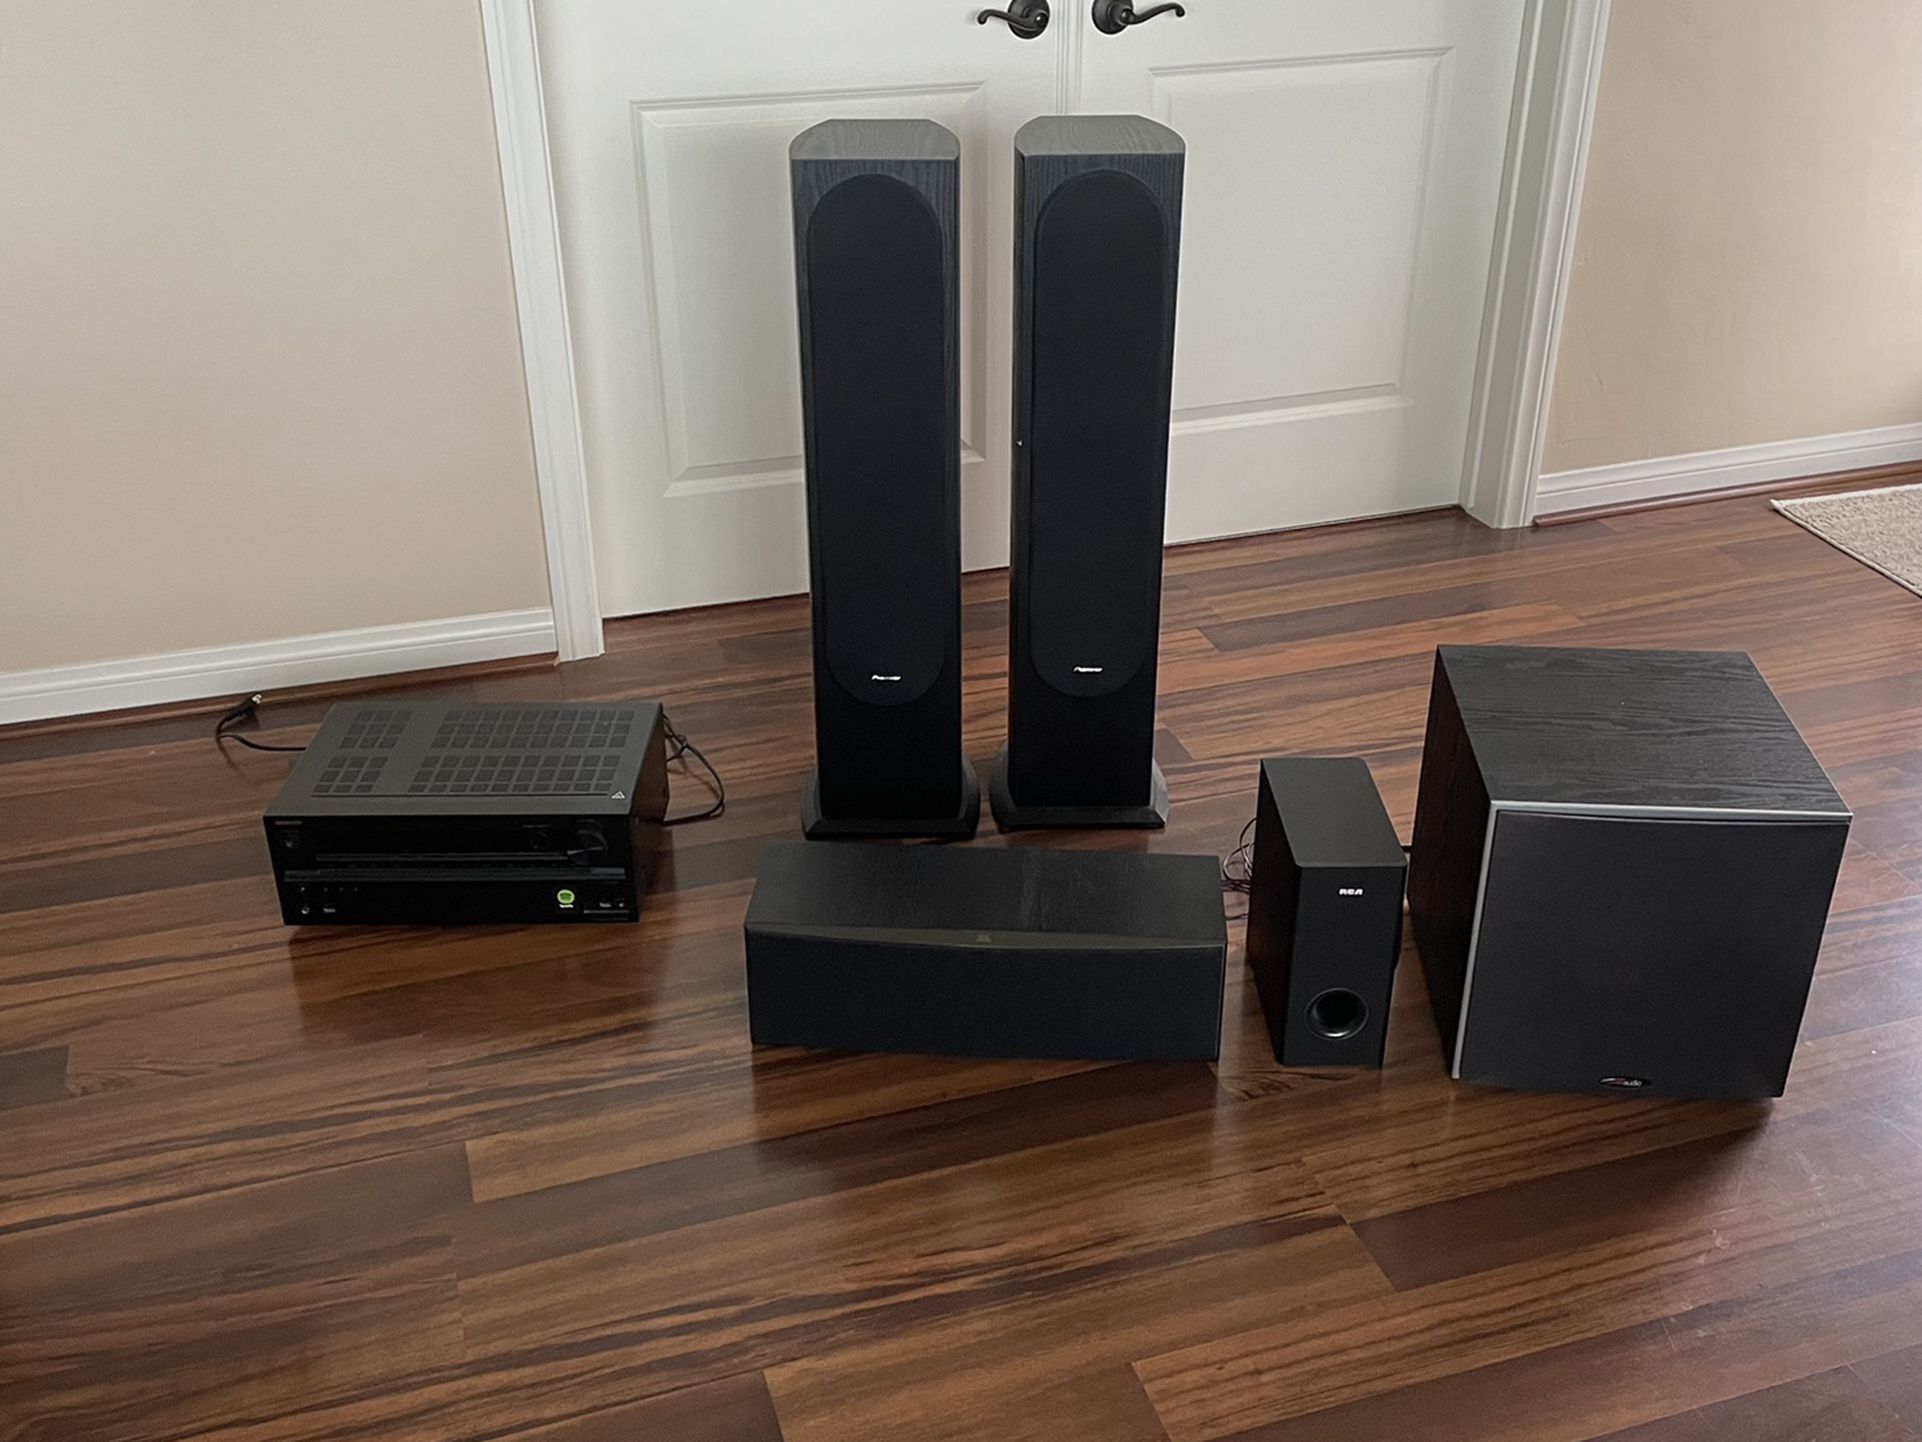 Onkyo Surround Receiver And Speakers